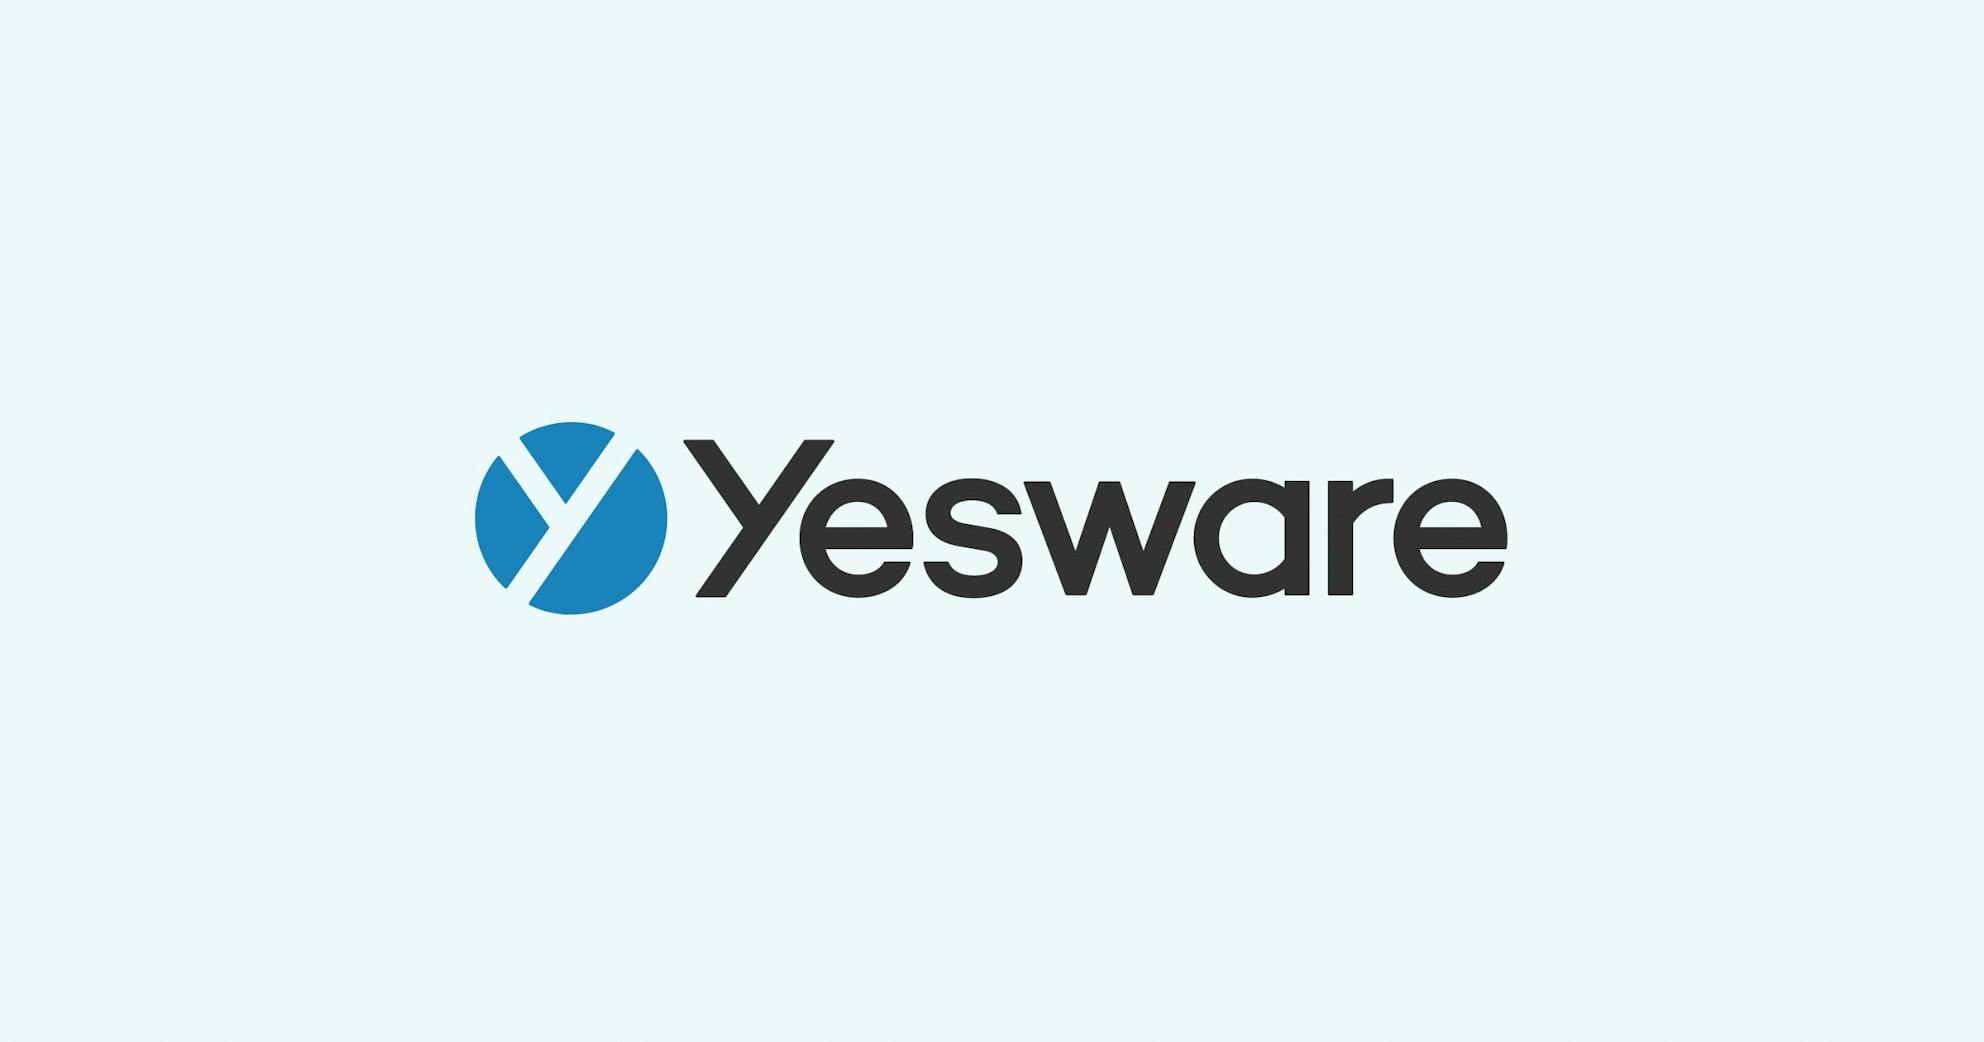 Yesware is Enterprise-Ready and Committed to Security